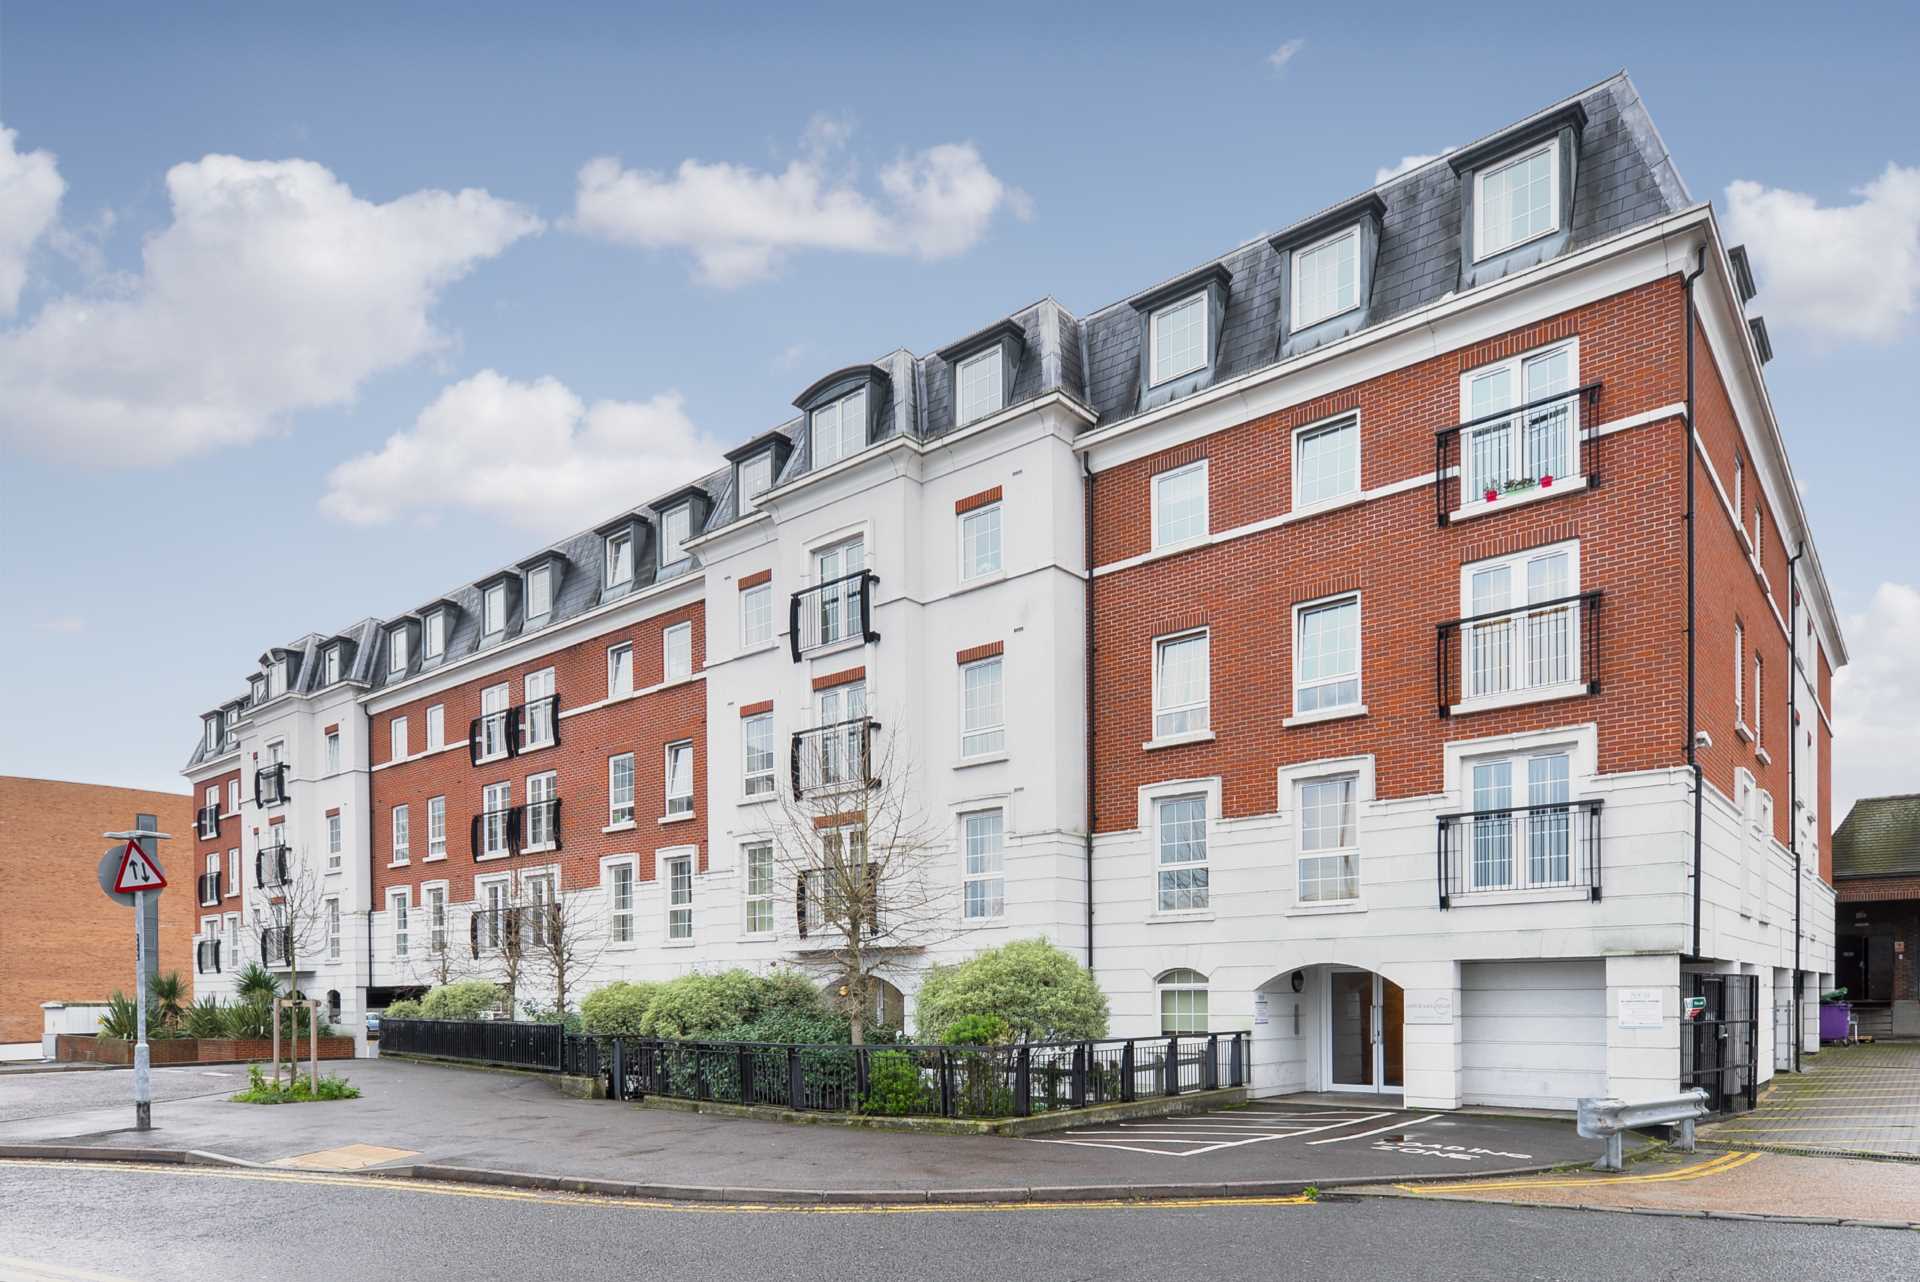 2 bed Apartment for rent in Epsom. From The Personal Agent - Epsom